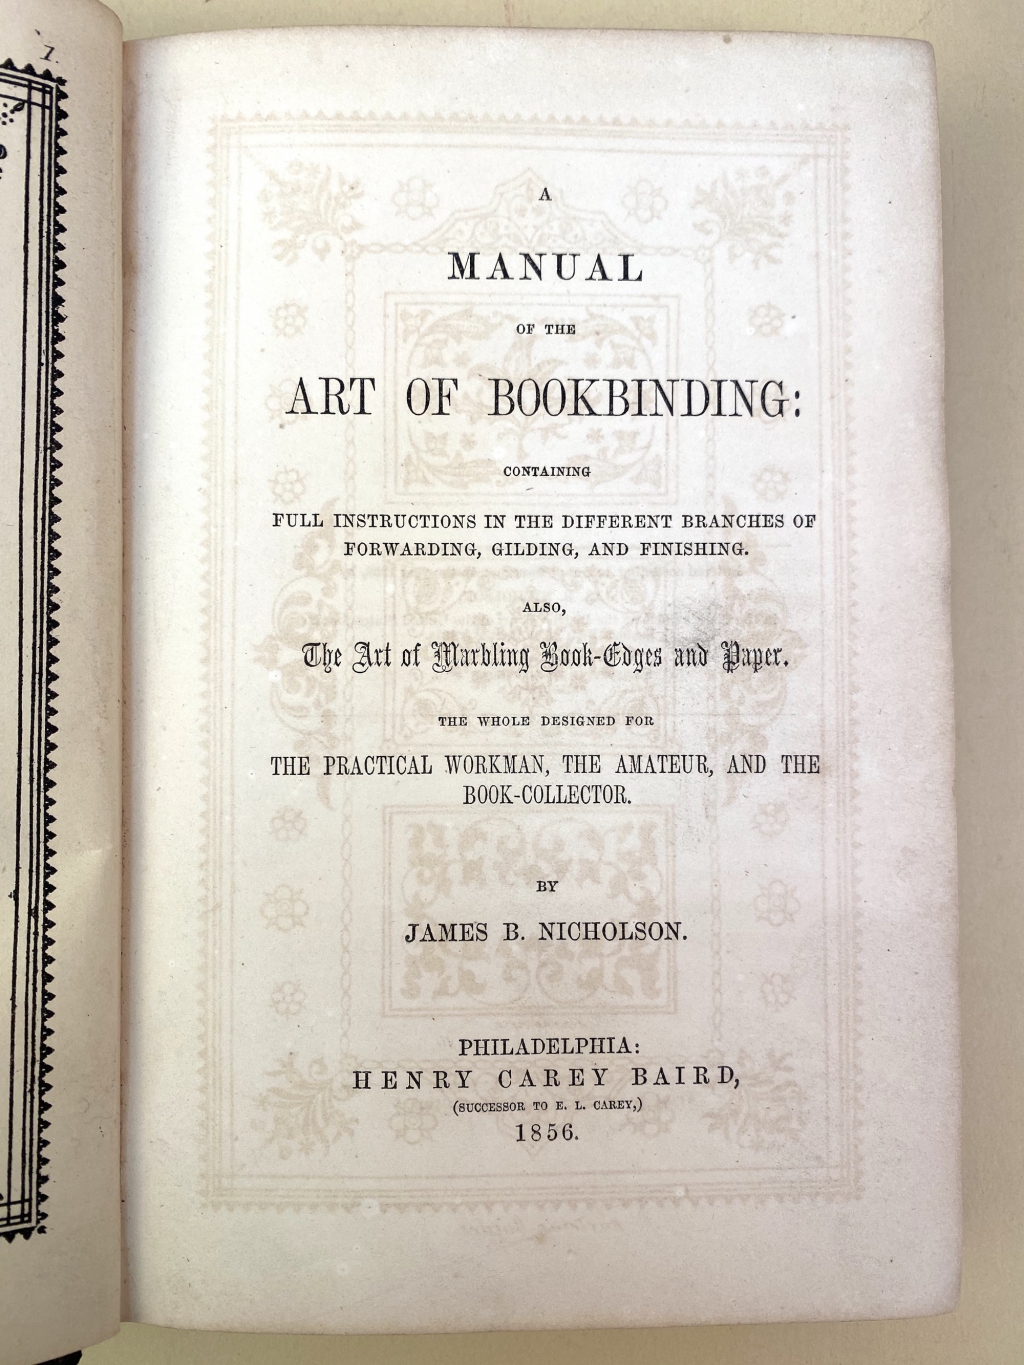 The offsetting of the ink from the binding design on the frontispiece of this copy of the original edition makes an attractive design on the title page.